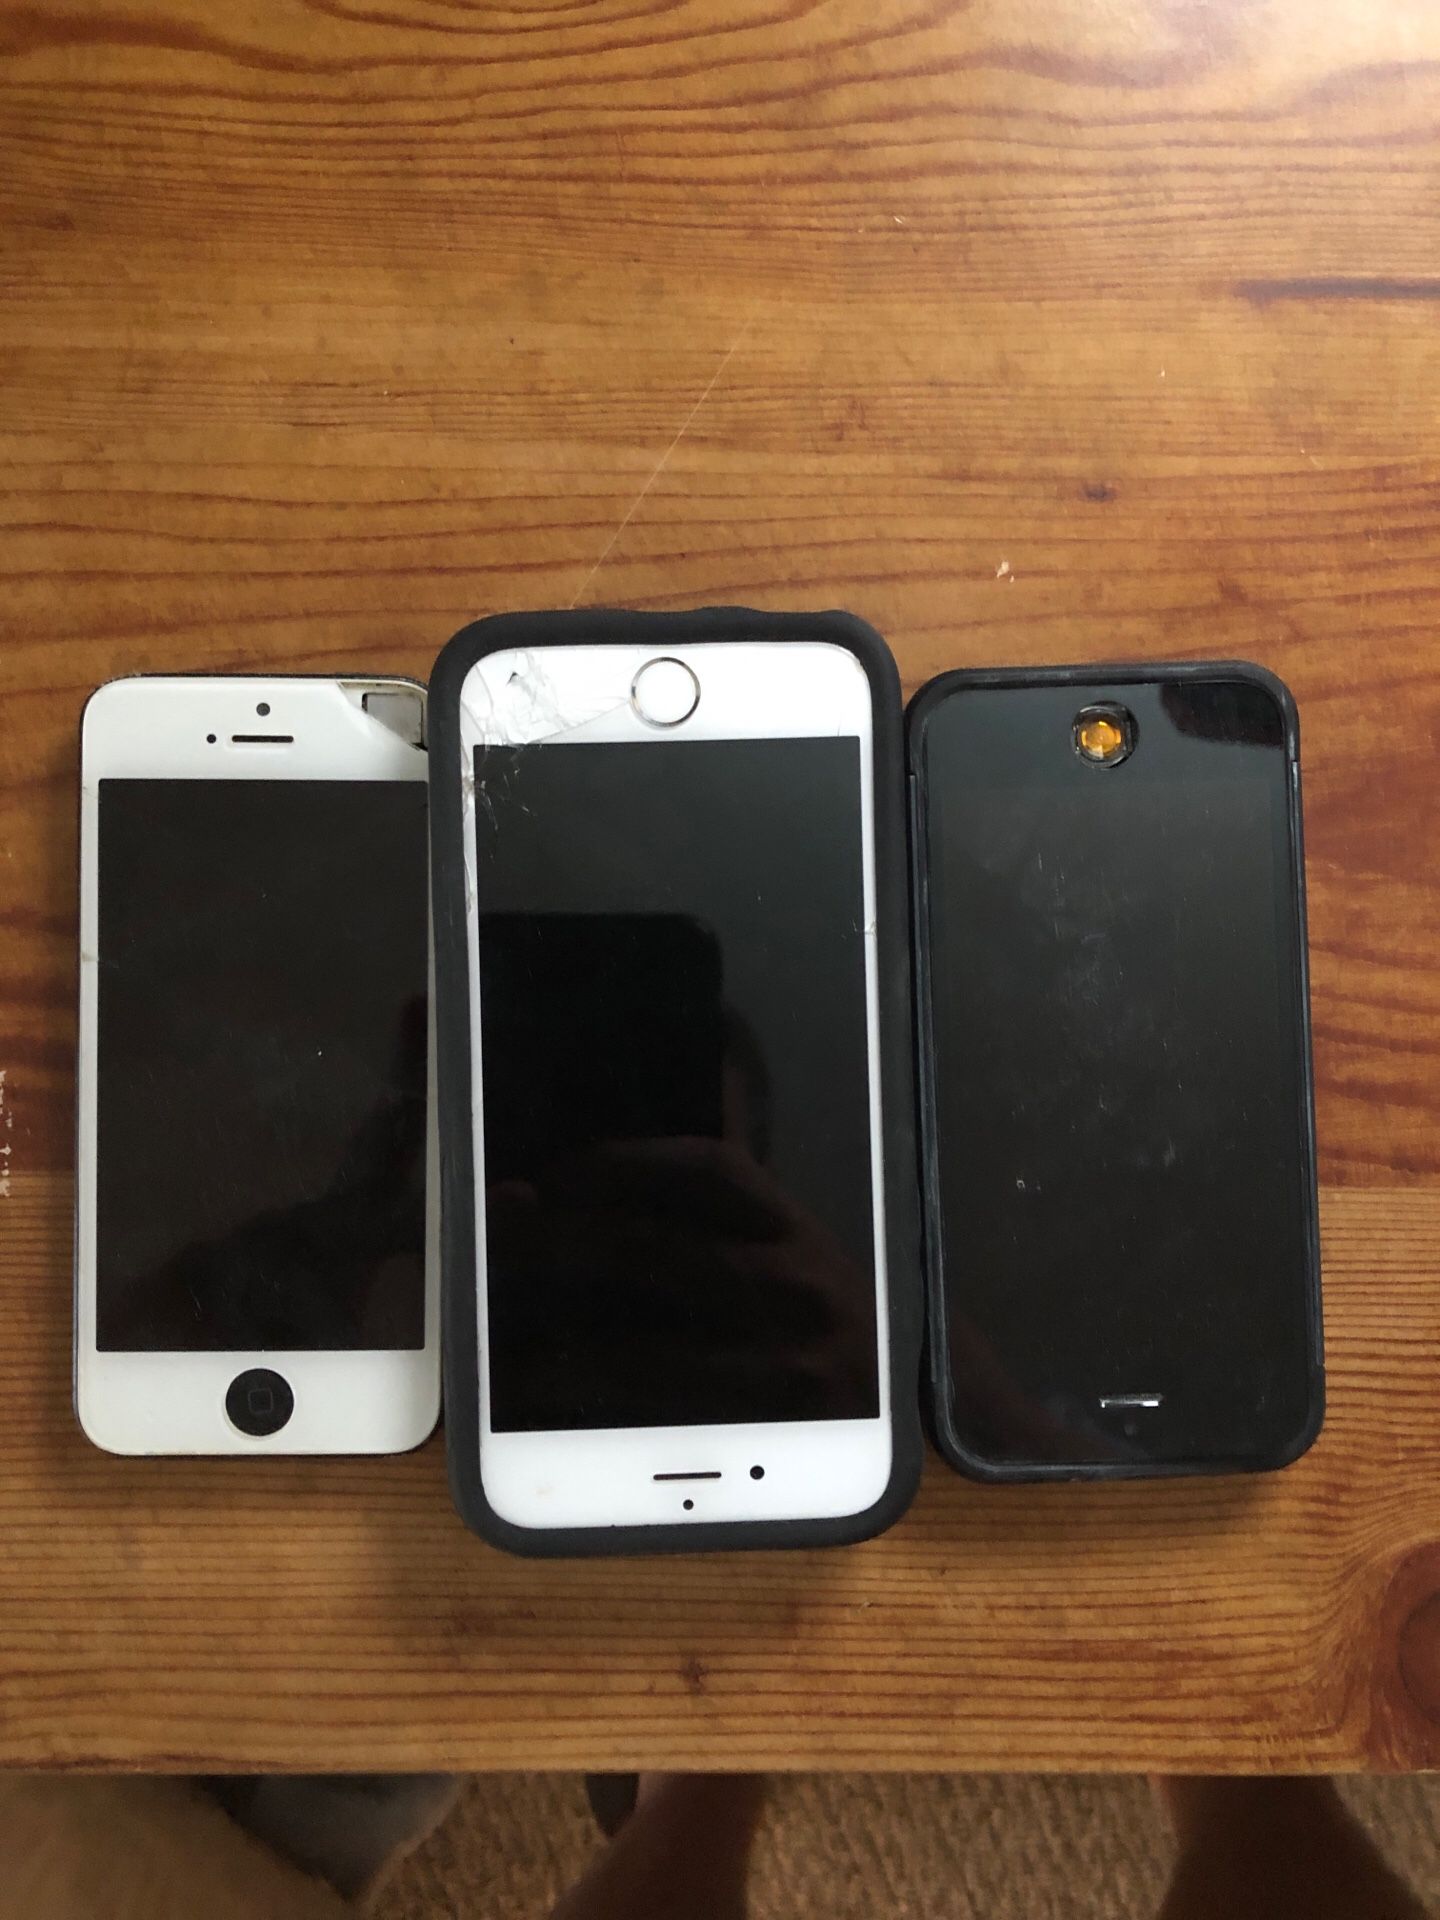 Old iPhones (4 and 5)